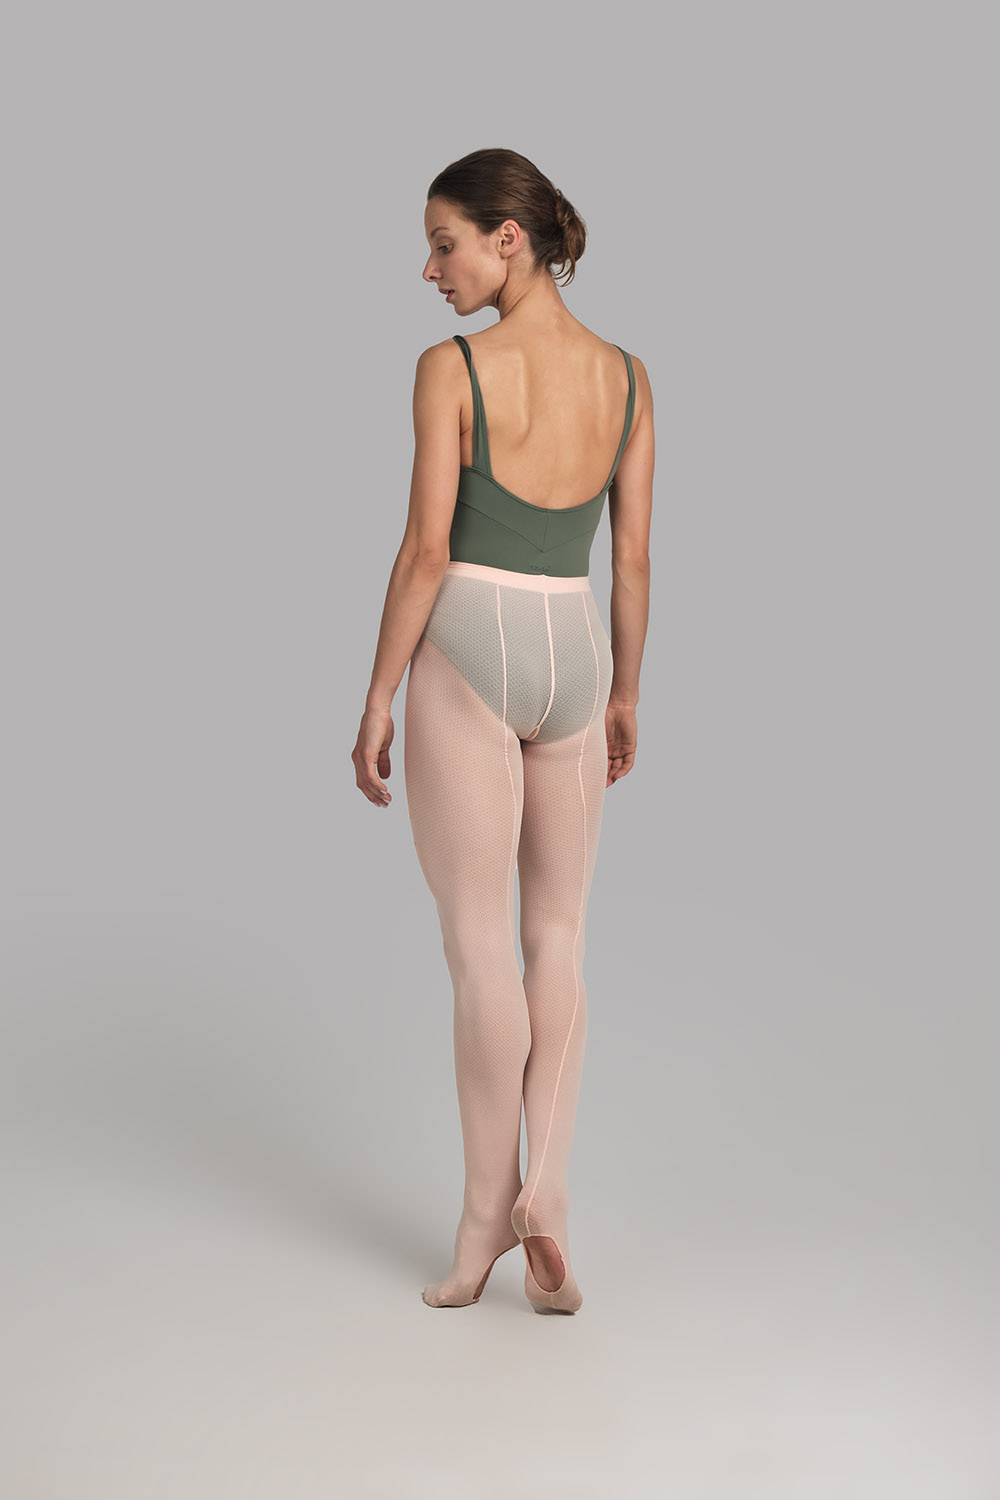 Mesh Seamed Convertible tights (0054/0N)  Nikolay® - official online shop  of pointe shoes and dance apparel in the USA